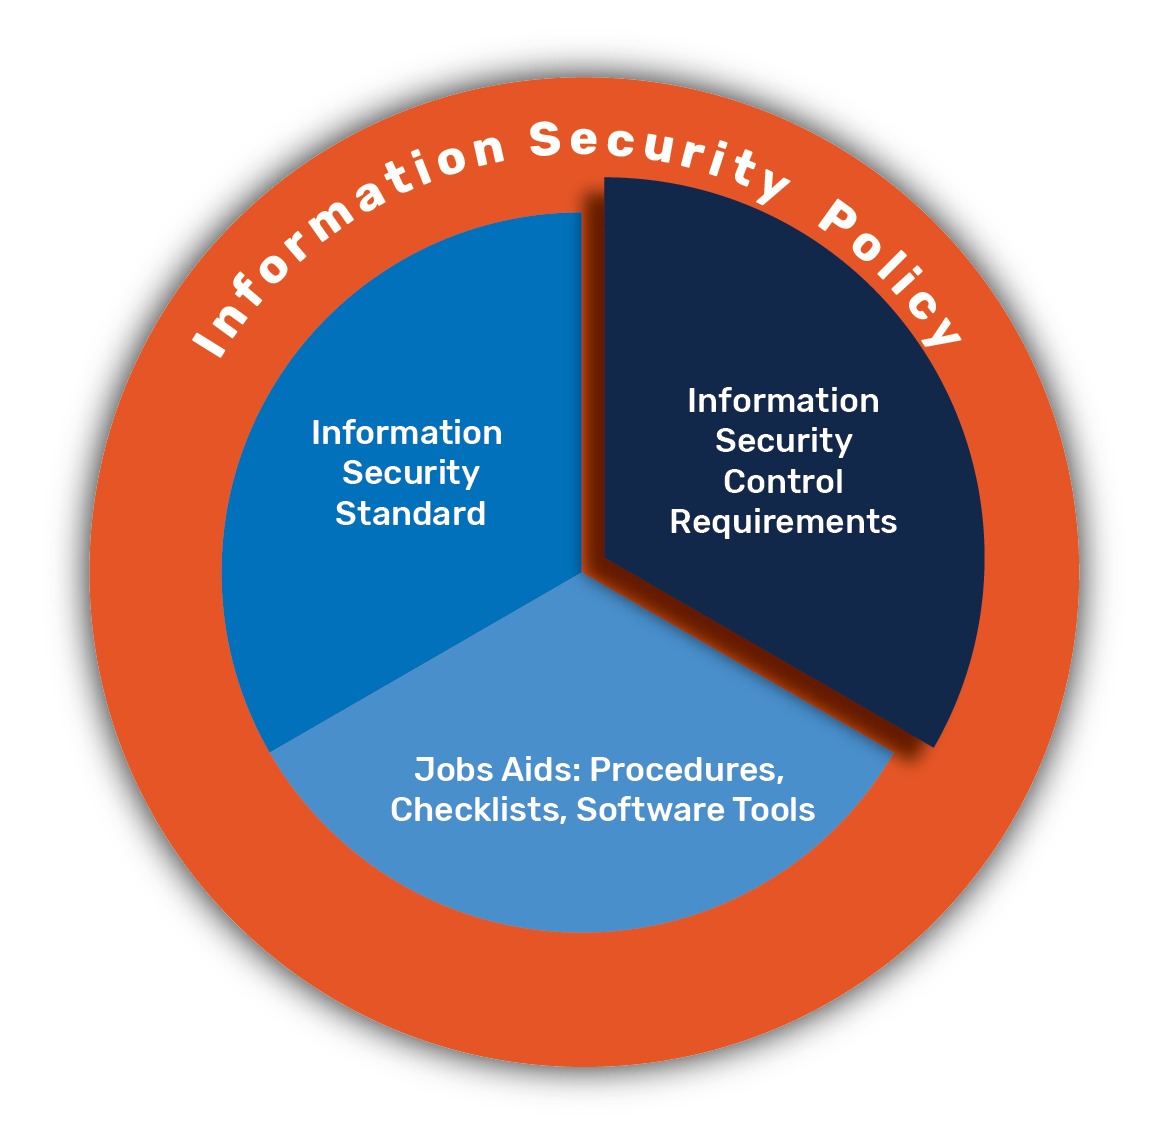 Security Program logo featuring the Data Policy and Information Security Policy circling the Information Security standards (highlighted), control requirements, and job aids.